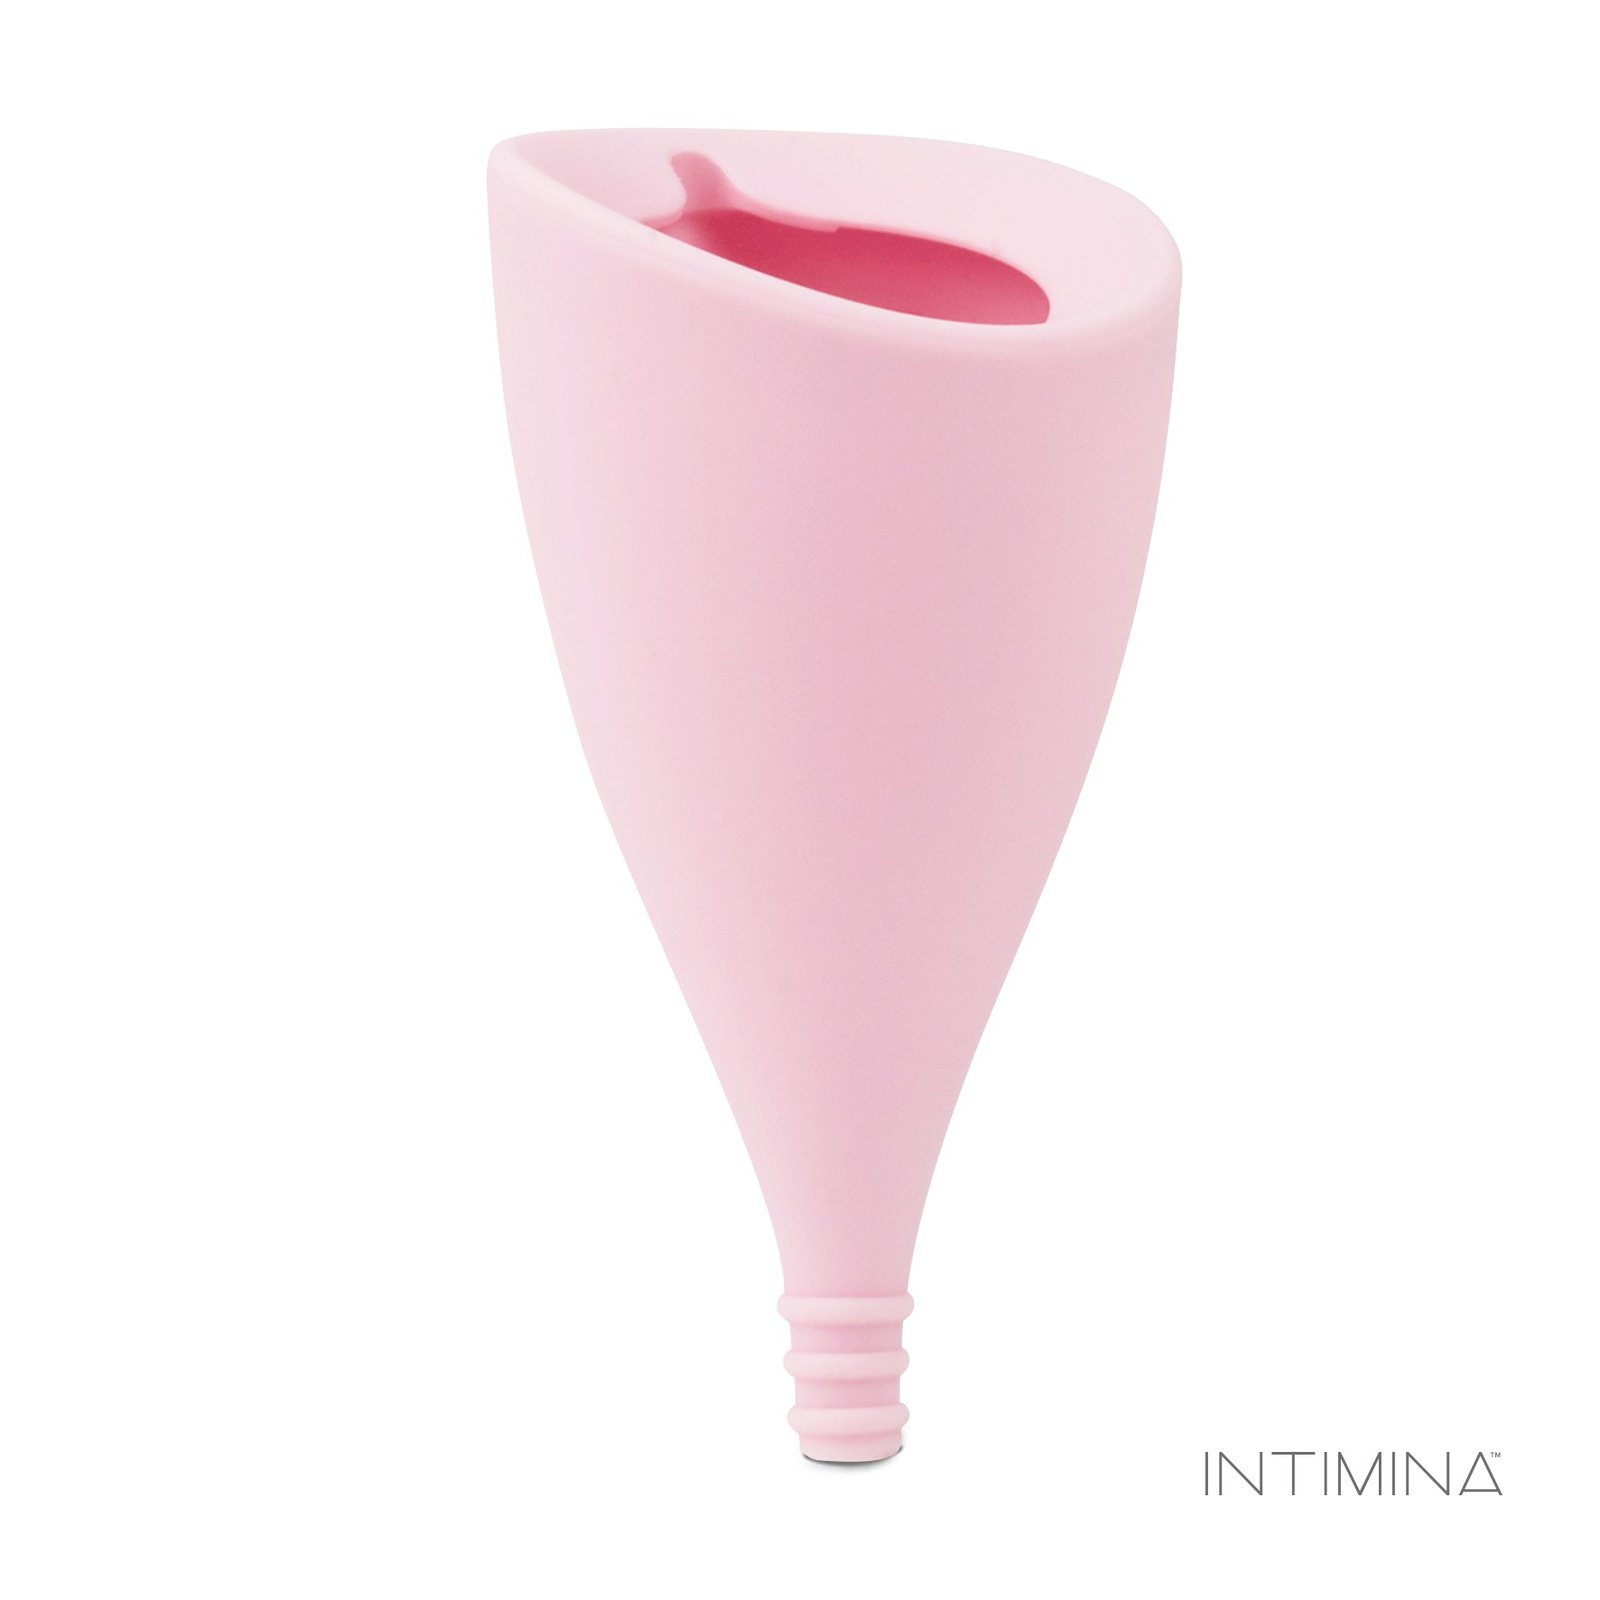 INTIMINA Lily Cup A 1 st